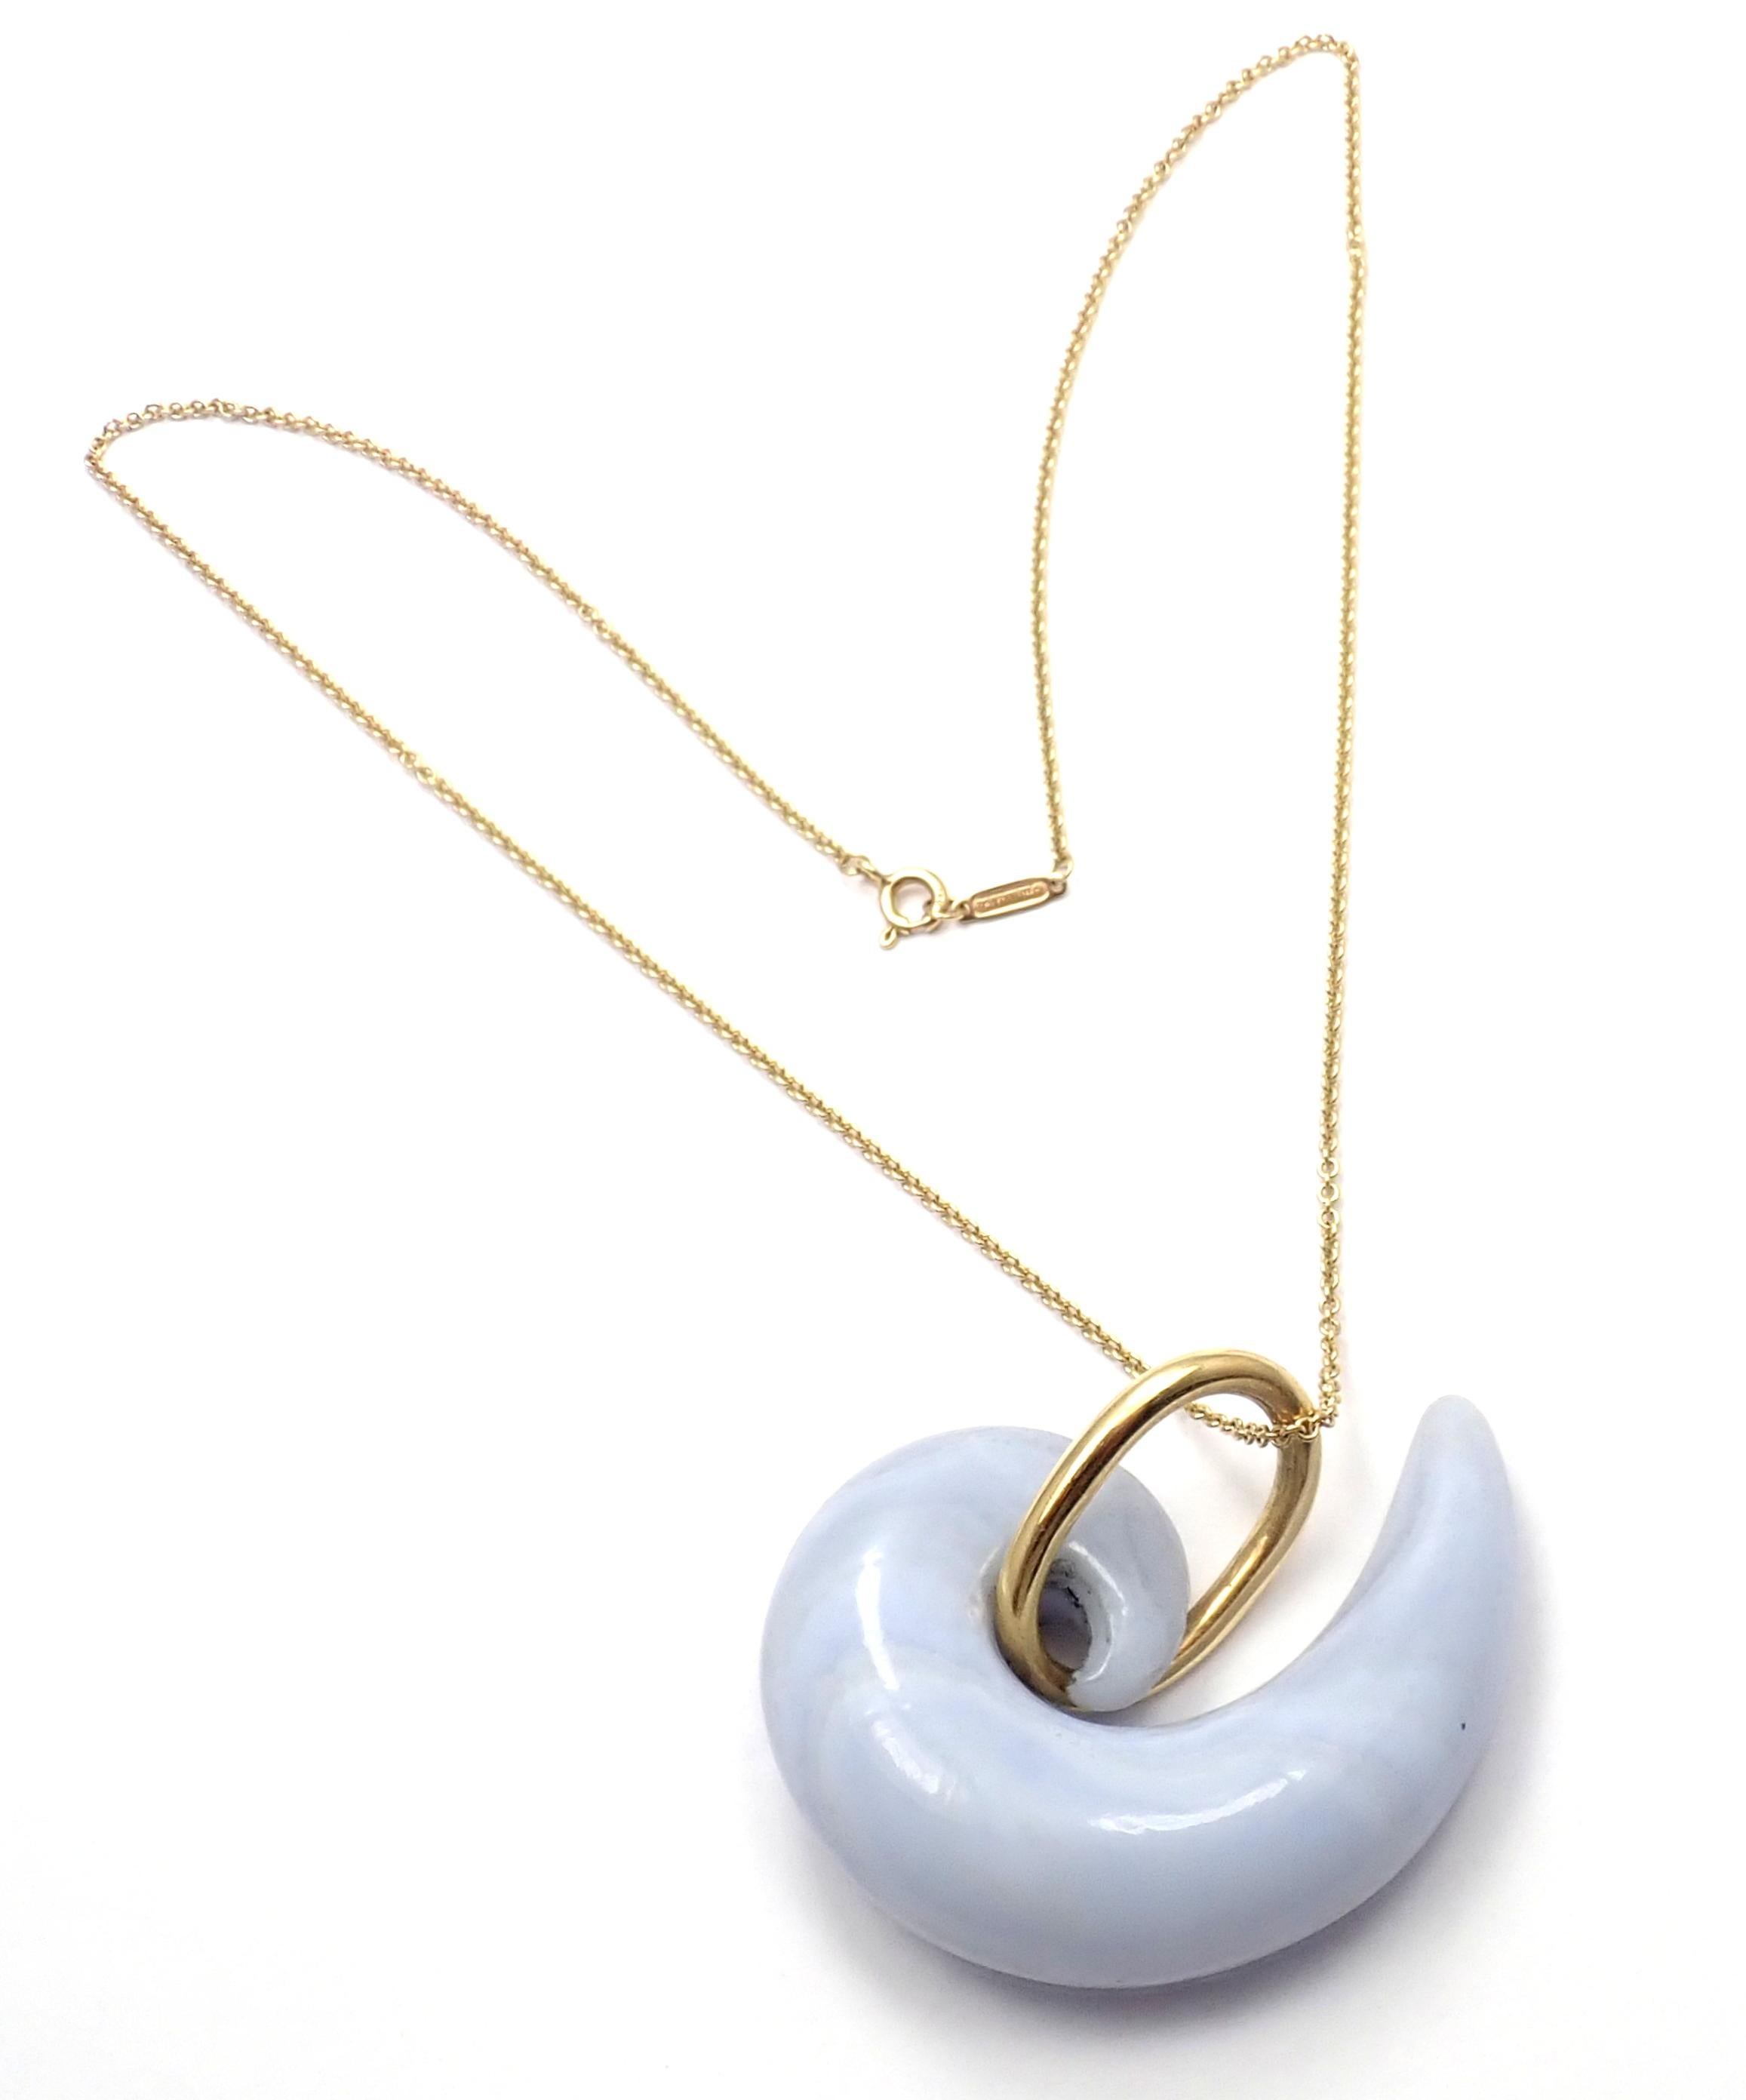 18k Yellow Gold Large Chalcedony Spiral Vintage Pendant Necklace by Tiffany & Co. 
With Large chalcedony stone.
Details: 
Chain Length: 18